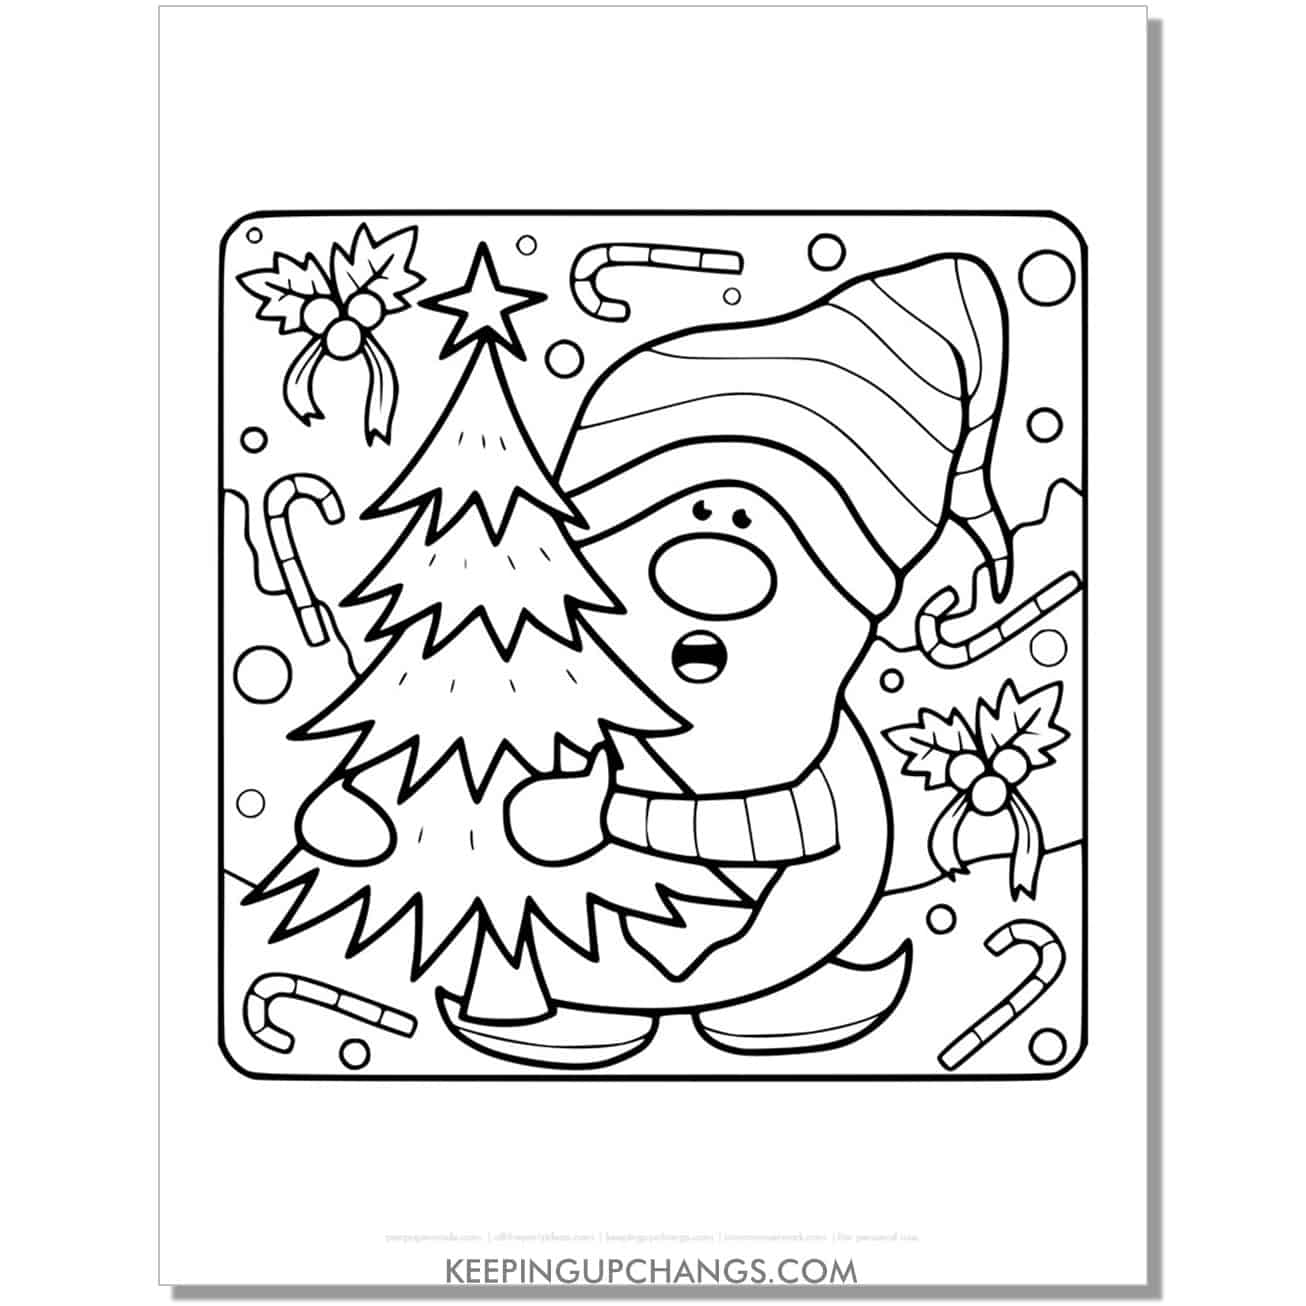 free christmas gnome with tree, mistletoe, candy cane coloring page.